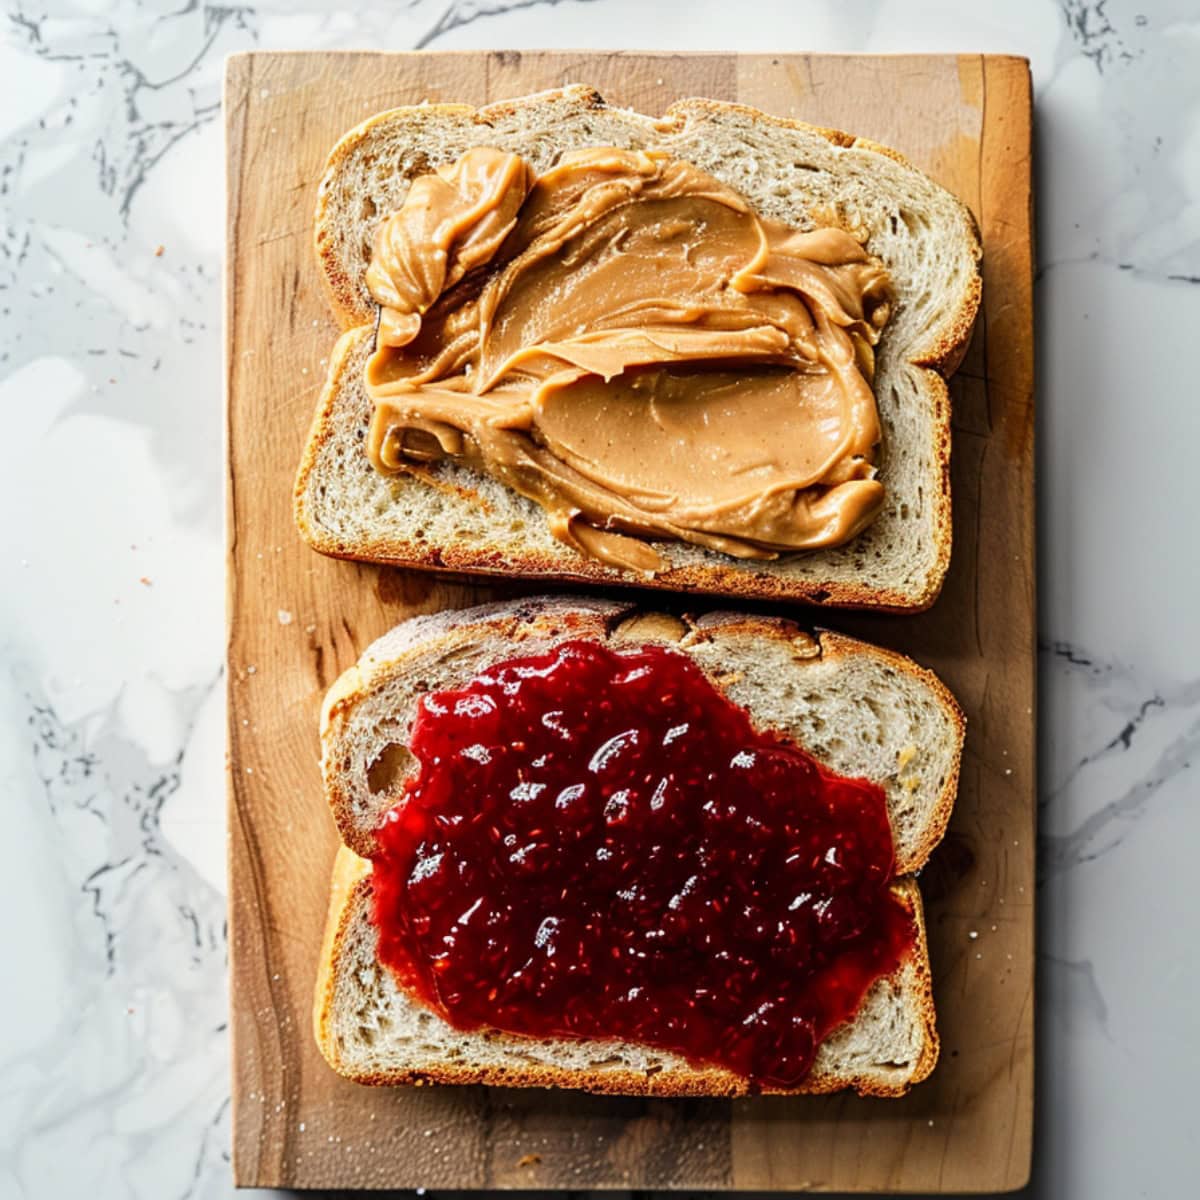 Slices of bread with peanut butter and jelly filling.